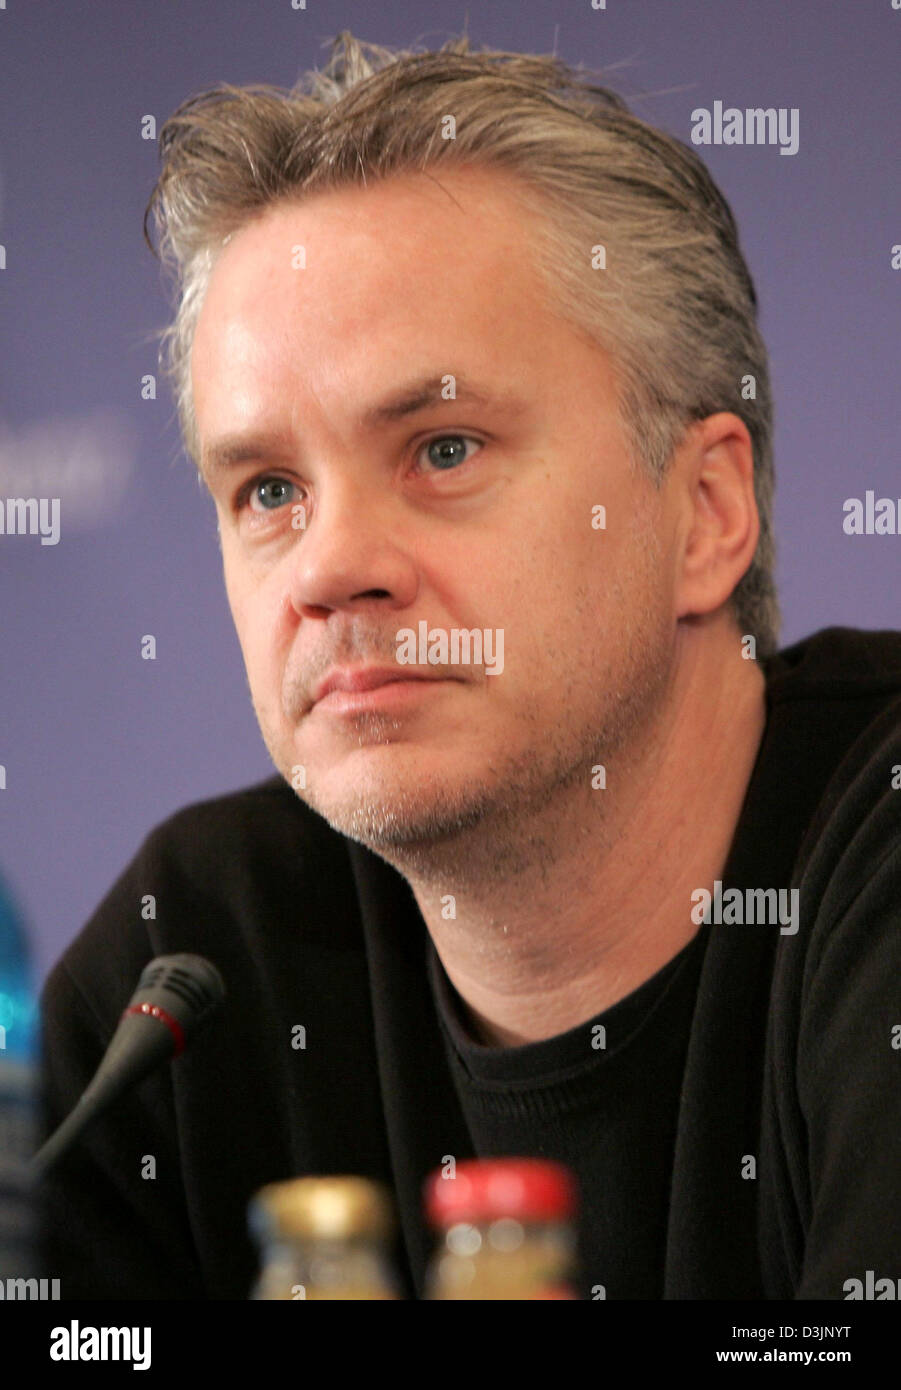 (dpa) - US actor Tim Robbins pictured during a press conference for the charity gala 'Cinema for Peace' in Berlin, Germany, 13 February 2005. The charity event, which took place on 14 February, was one of the highlights of this year's 55th Berlinale international film festival. Proceeds go to UNICEF. Stock Photo